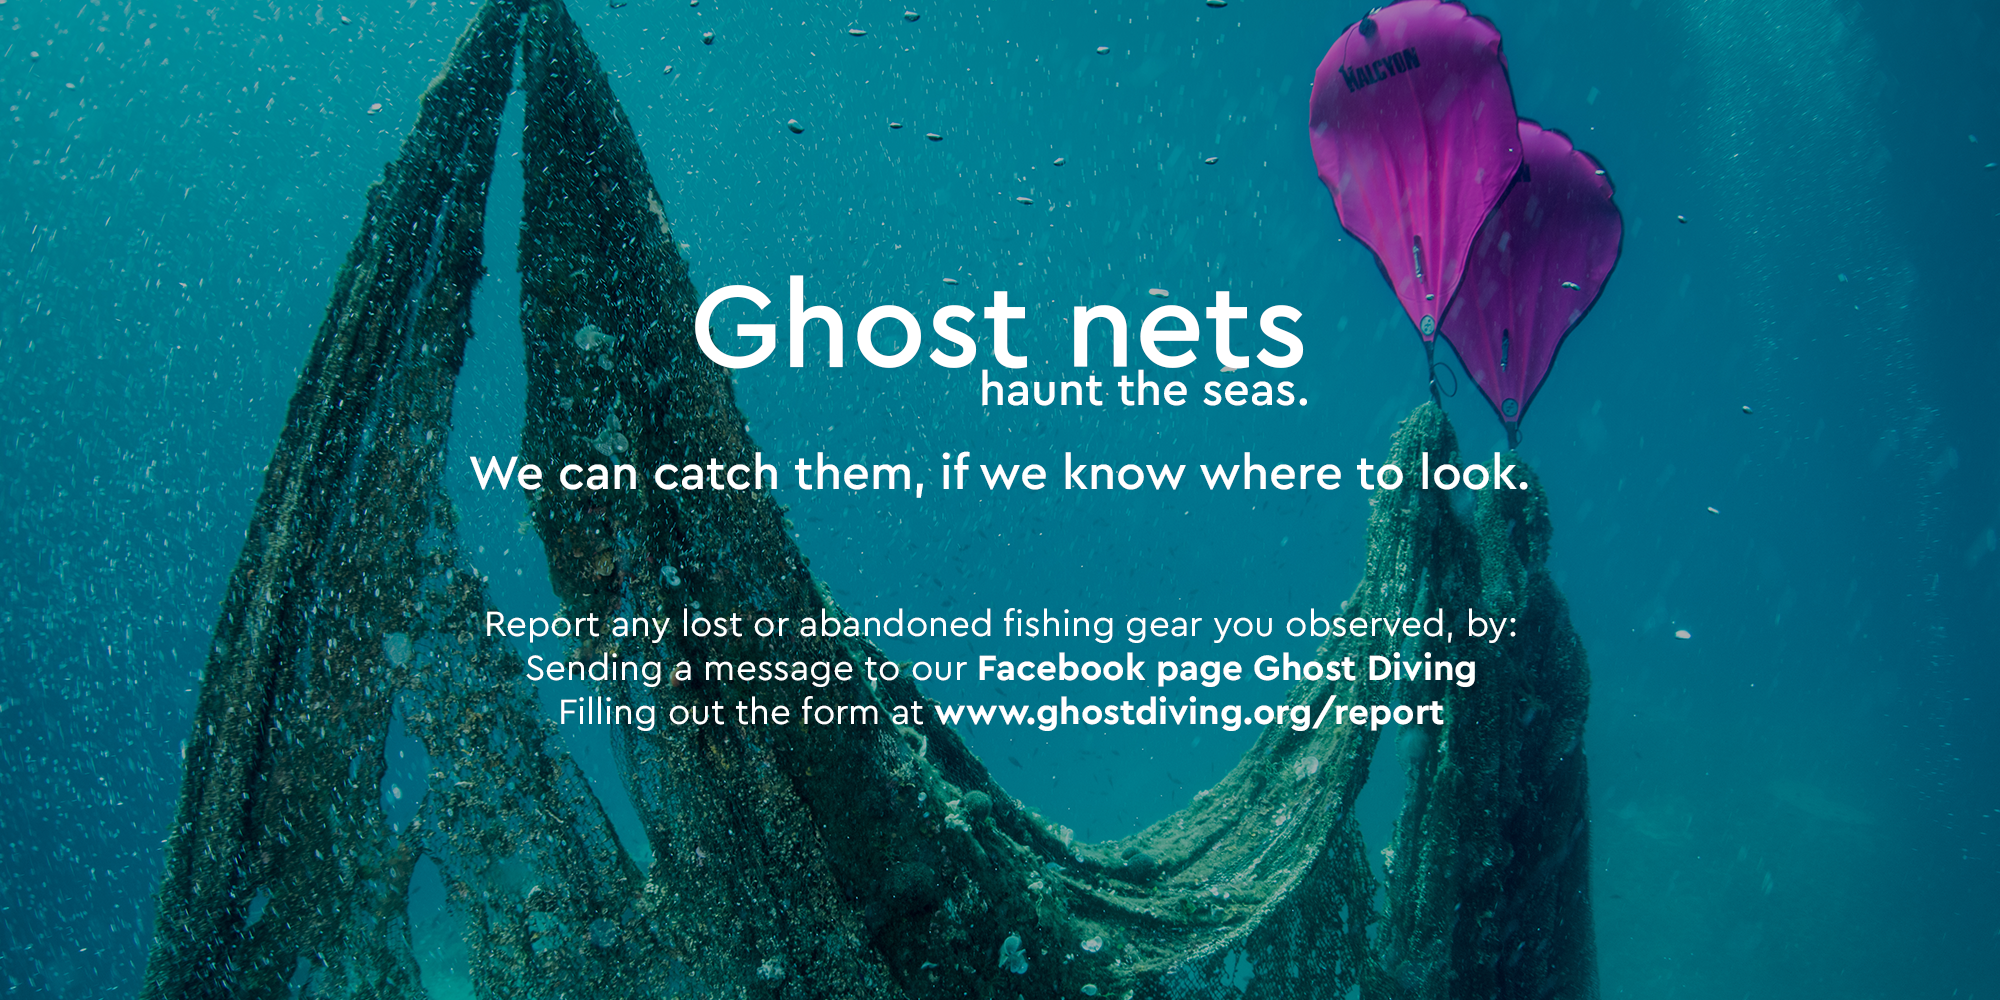 A New Campaign to Report Lost Fishing Gear - HEALTHY SEAS